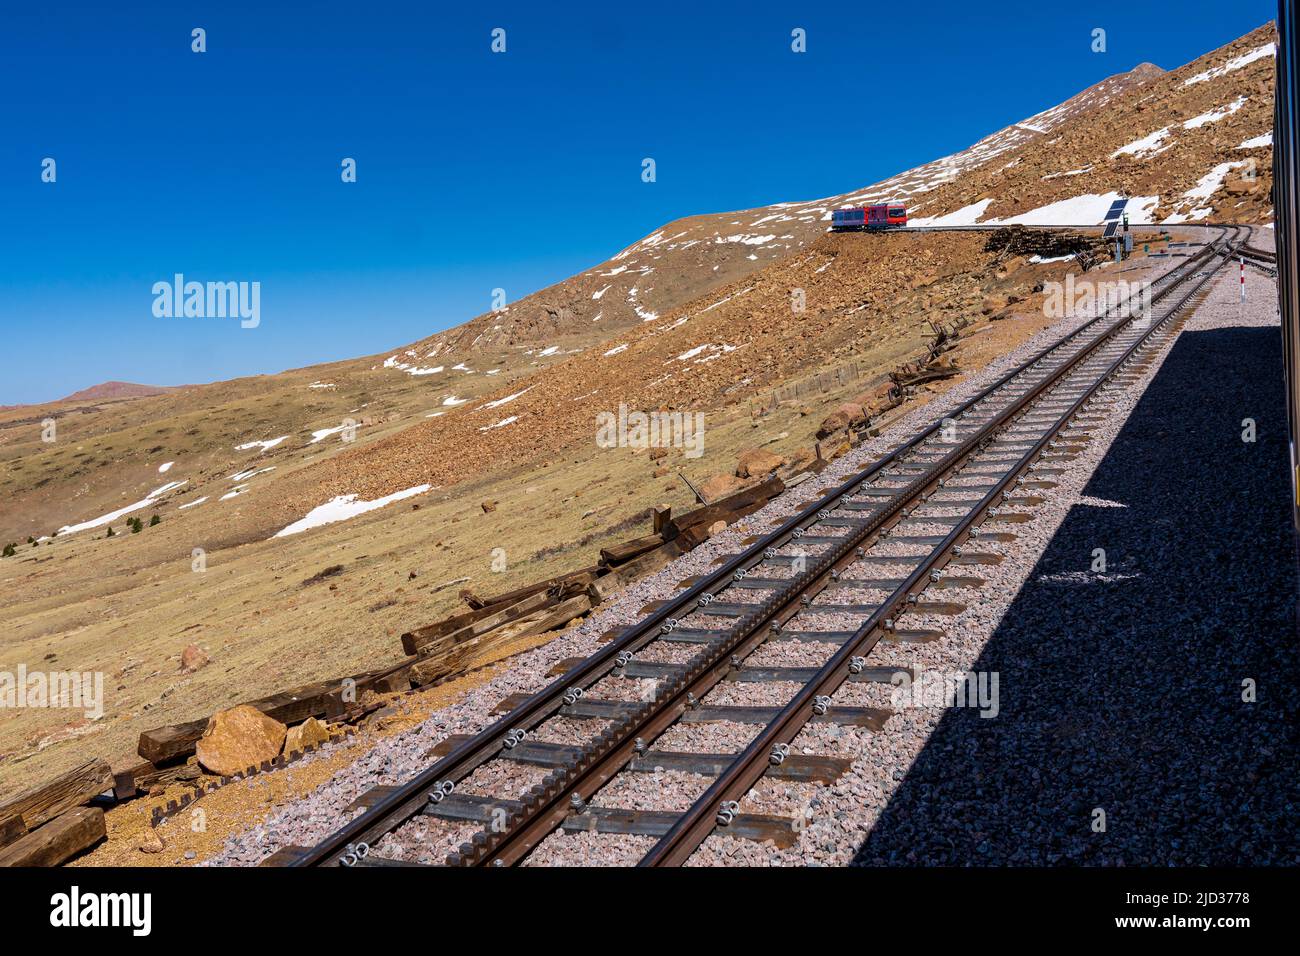 On the Cog Railway Above the Timberline on Pikes Peak Mountain Stock Photo